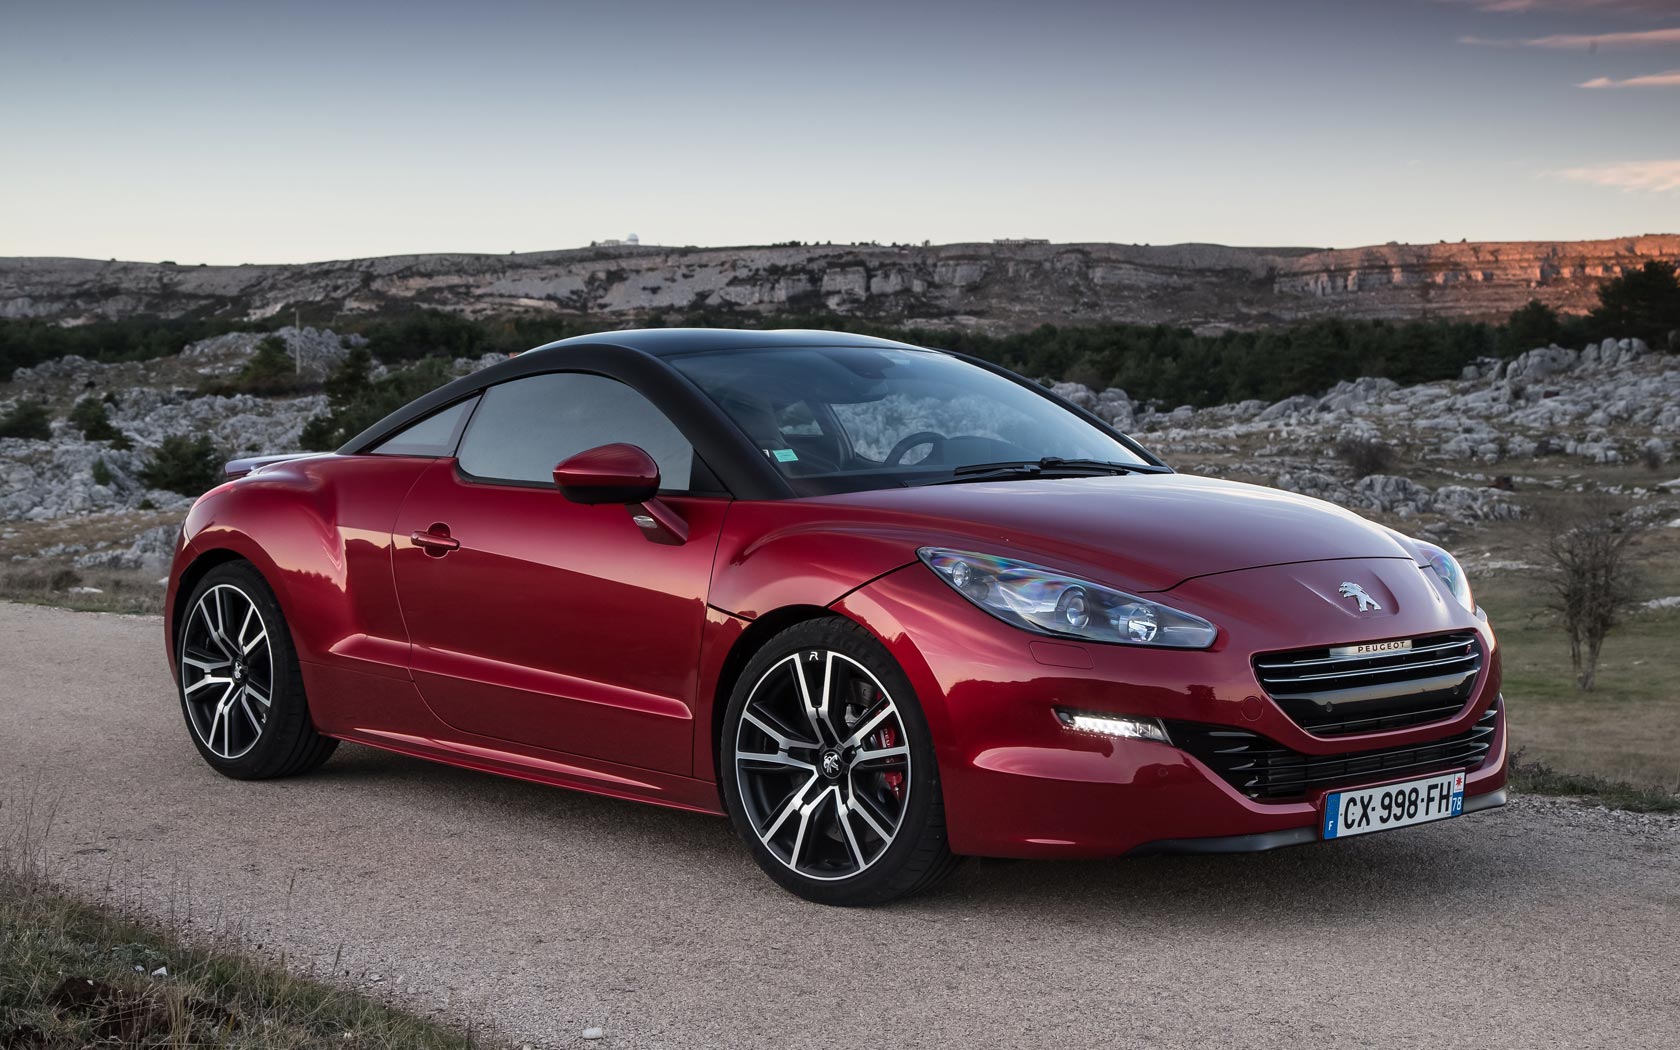 Buying a Peugeot car in Israel